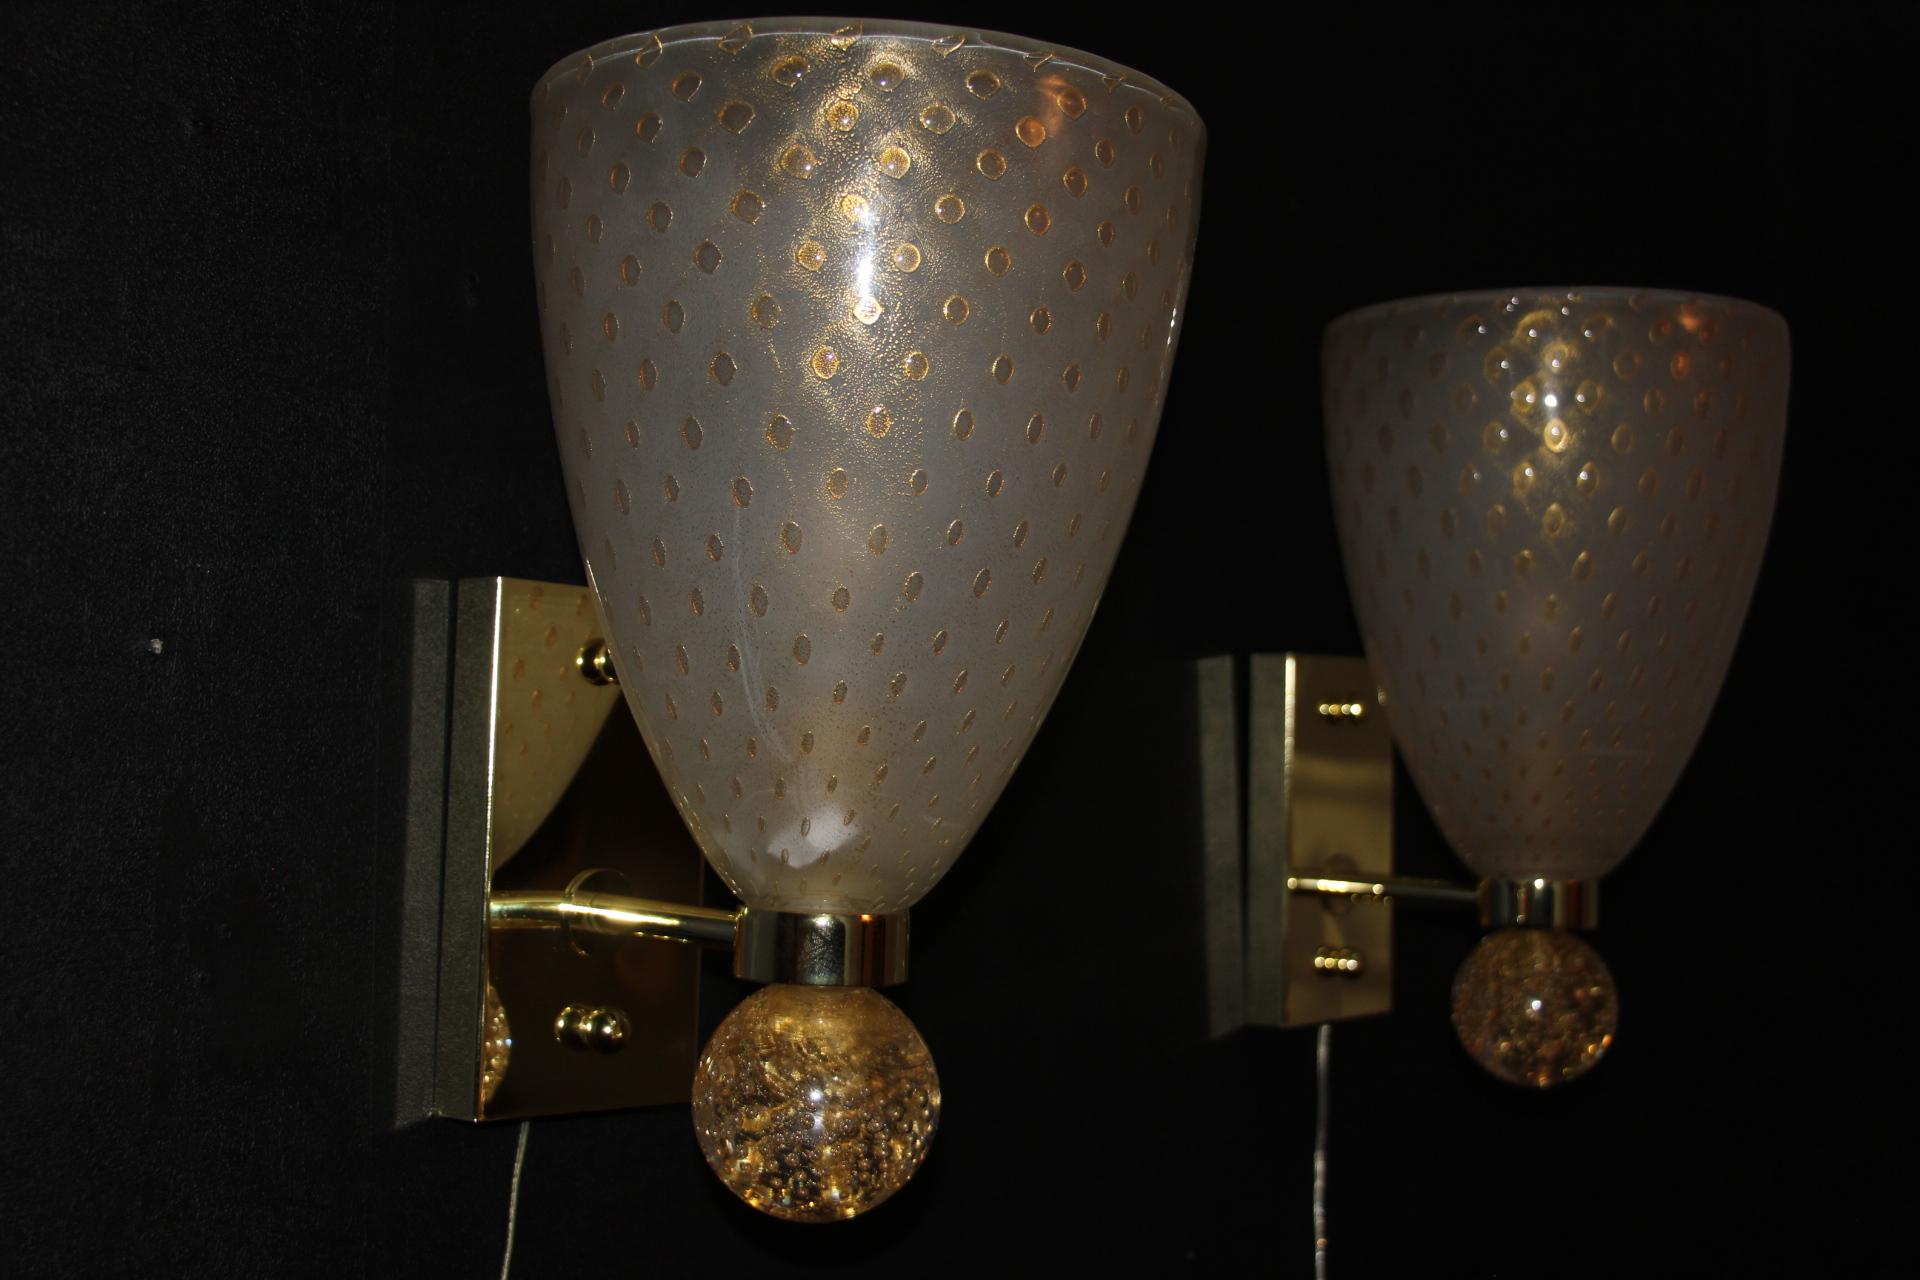 Barovier Style Murano Glass Sconces with Golden Flakes and Bubbles, Wall Lights In Excellent Condition For Sale In Saint-Ouen, FR